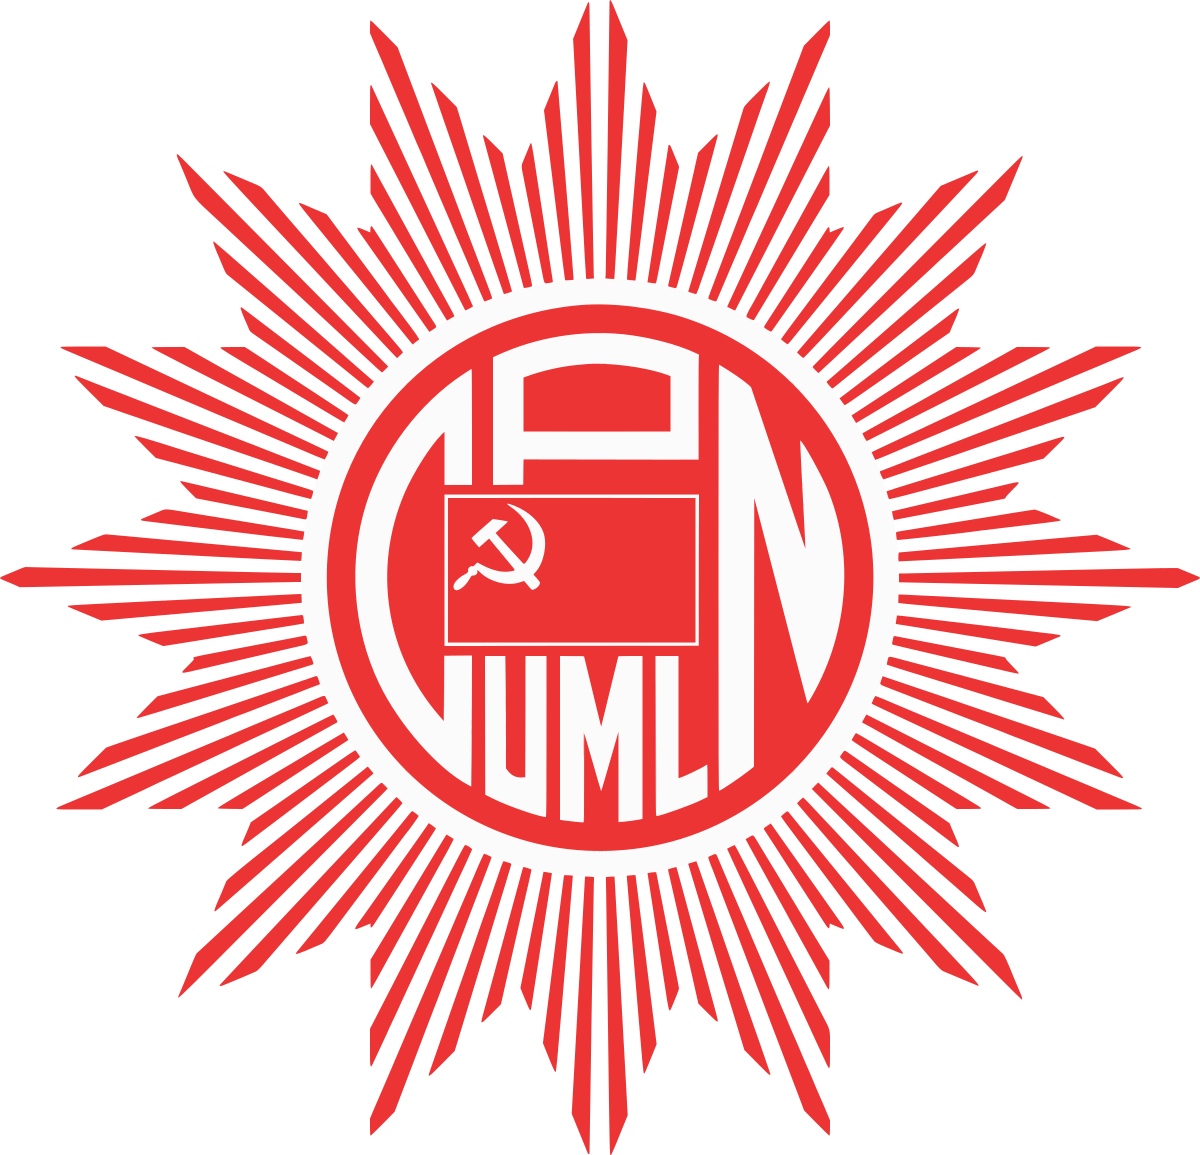 UML to seek clarification from eight leaders